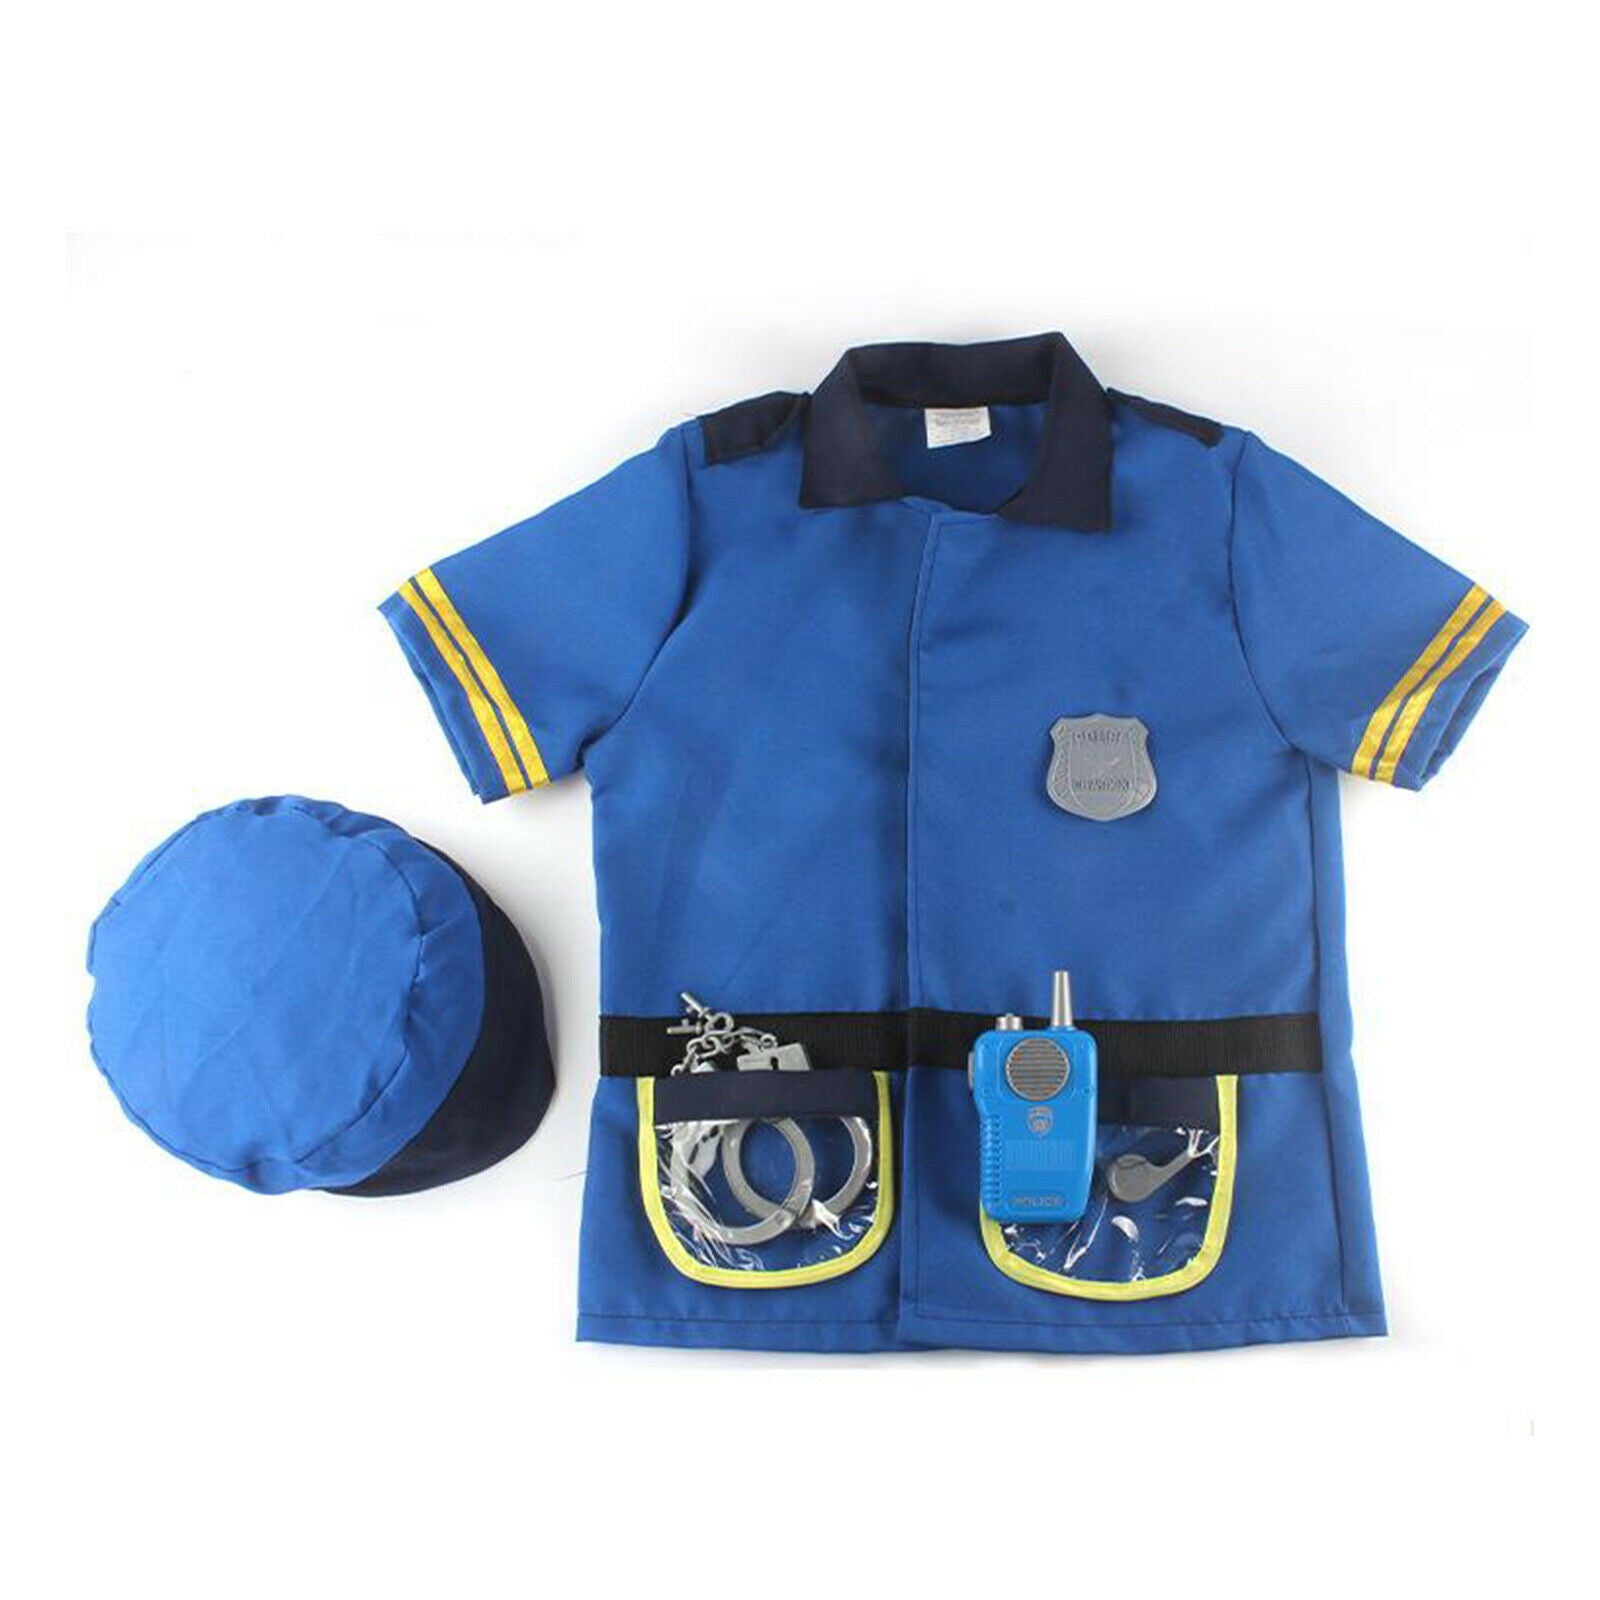 6x Police Officer Costume Sets with Accessories for Kids Role Play Accessories